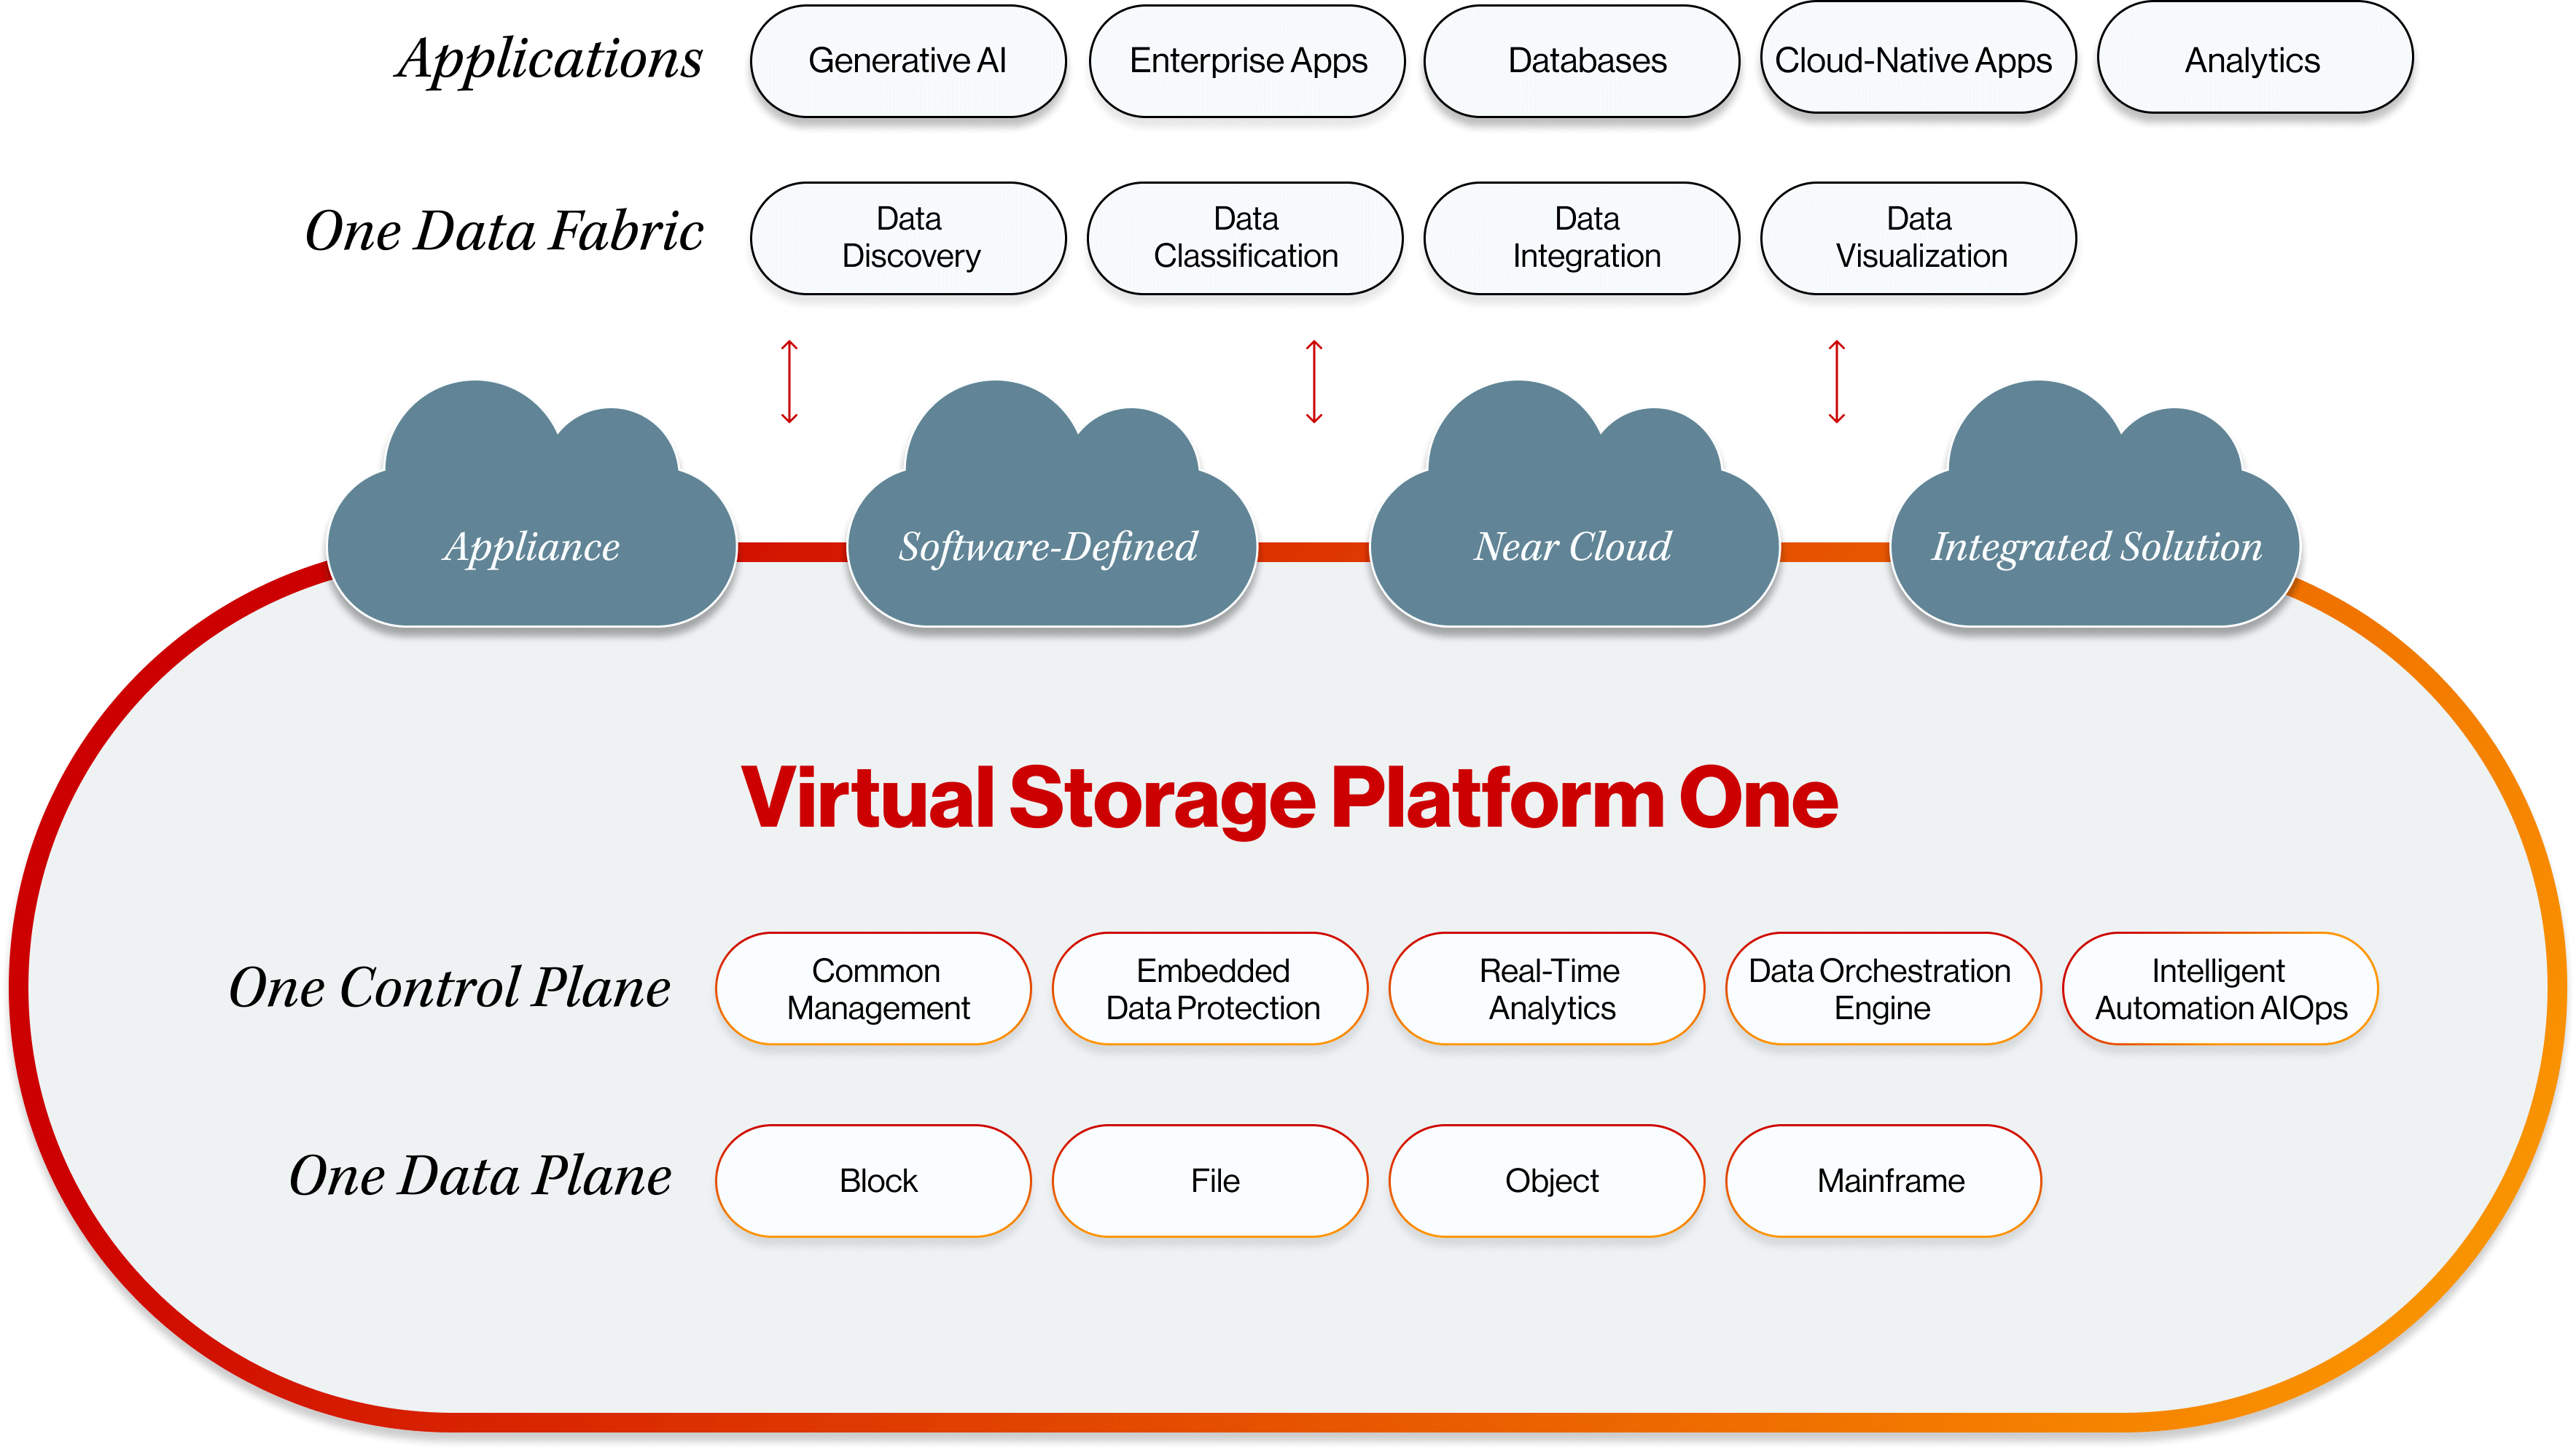 Hitachi Vantara Virtual Storage Platform, VSP One, is a single solution designed to eliminate application and data silos and stay ahead of exponential data growth and seismic innovation shifts like genAI. Bringing data together to create value across hybrid cloud and on-prem IT ecosystems with the power of one data fabric, one control plane and one data plane. A single platform providing the simplicity and scale to unleash the full potential of your data.Hitachi Vantara Virtual Storage Platform, VSP One, is a single solution designed to eliminate application and data silos and stay ahead of exponential data growth and seismic innovation shifts like genAI. Bringing data together to create value across hybrid cloud and on-prem IT ecosystems with the power of one data fabric, one control plane and one data plane. A single platform providing the simplicity and scale to unleash the full potential of your data.Hitachi Vantara Virtual Storage Platform, VSP One, is a single solution designed to eliminate application and data silos and stay ahead of exponential data growth and seismic innovation shifts like genAI. Bringing data together to create value across hybrid cloud and on-prem IT ecosystems with the power of one data fabric, one control plane and one data plane. A single platform providing the simplicity and scale to unleash the full potential of your data.odHitachi Vantara Virtual Storage Platform, VSP One, is a single solution designed to eliminate application and data silos and stay ahead of exponential data growth and seismic innovation shifts like genAI. Bringing data together to create value across hybrid cloud and on-prem IT ecosystems with the power of one data fabric, one control plane and one data plane. A single platform providing the simplicity and scale to unleash the full potential of your data.